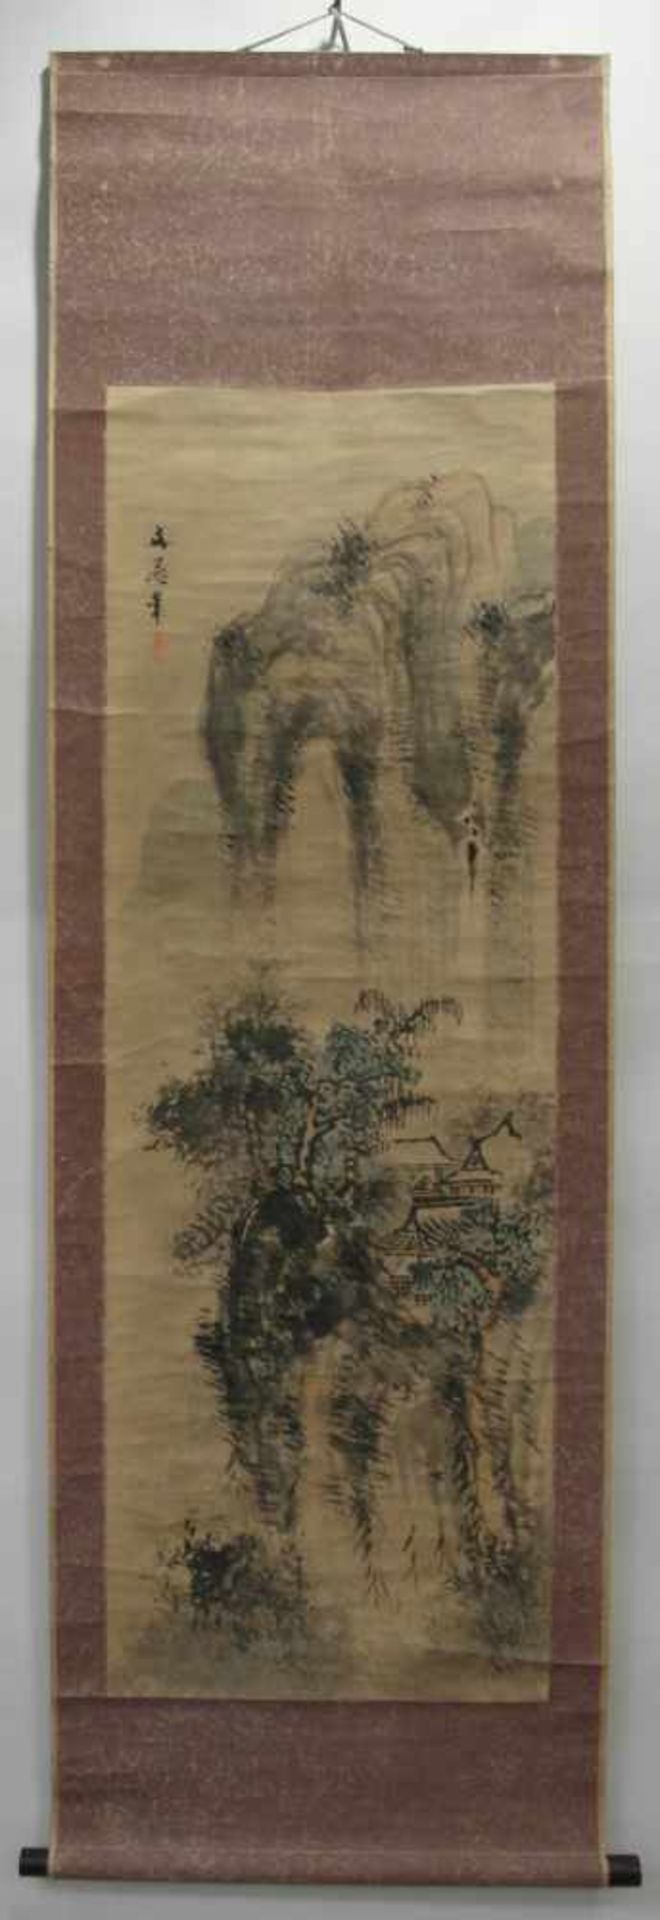 FOUR MOUNTAIN LANDSCAPES. Japan. 19th/20th c. Ink and colors on paper resp. silk. Mounted as hanging - Bild 3 aus 5